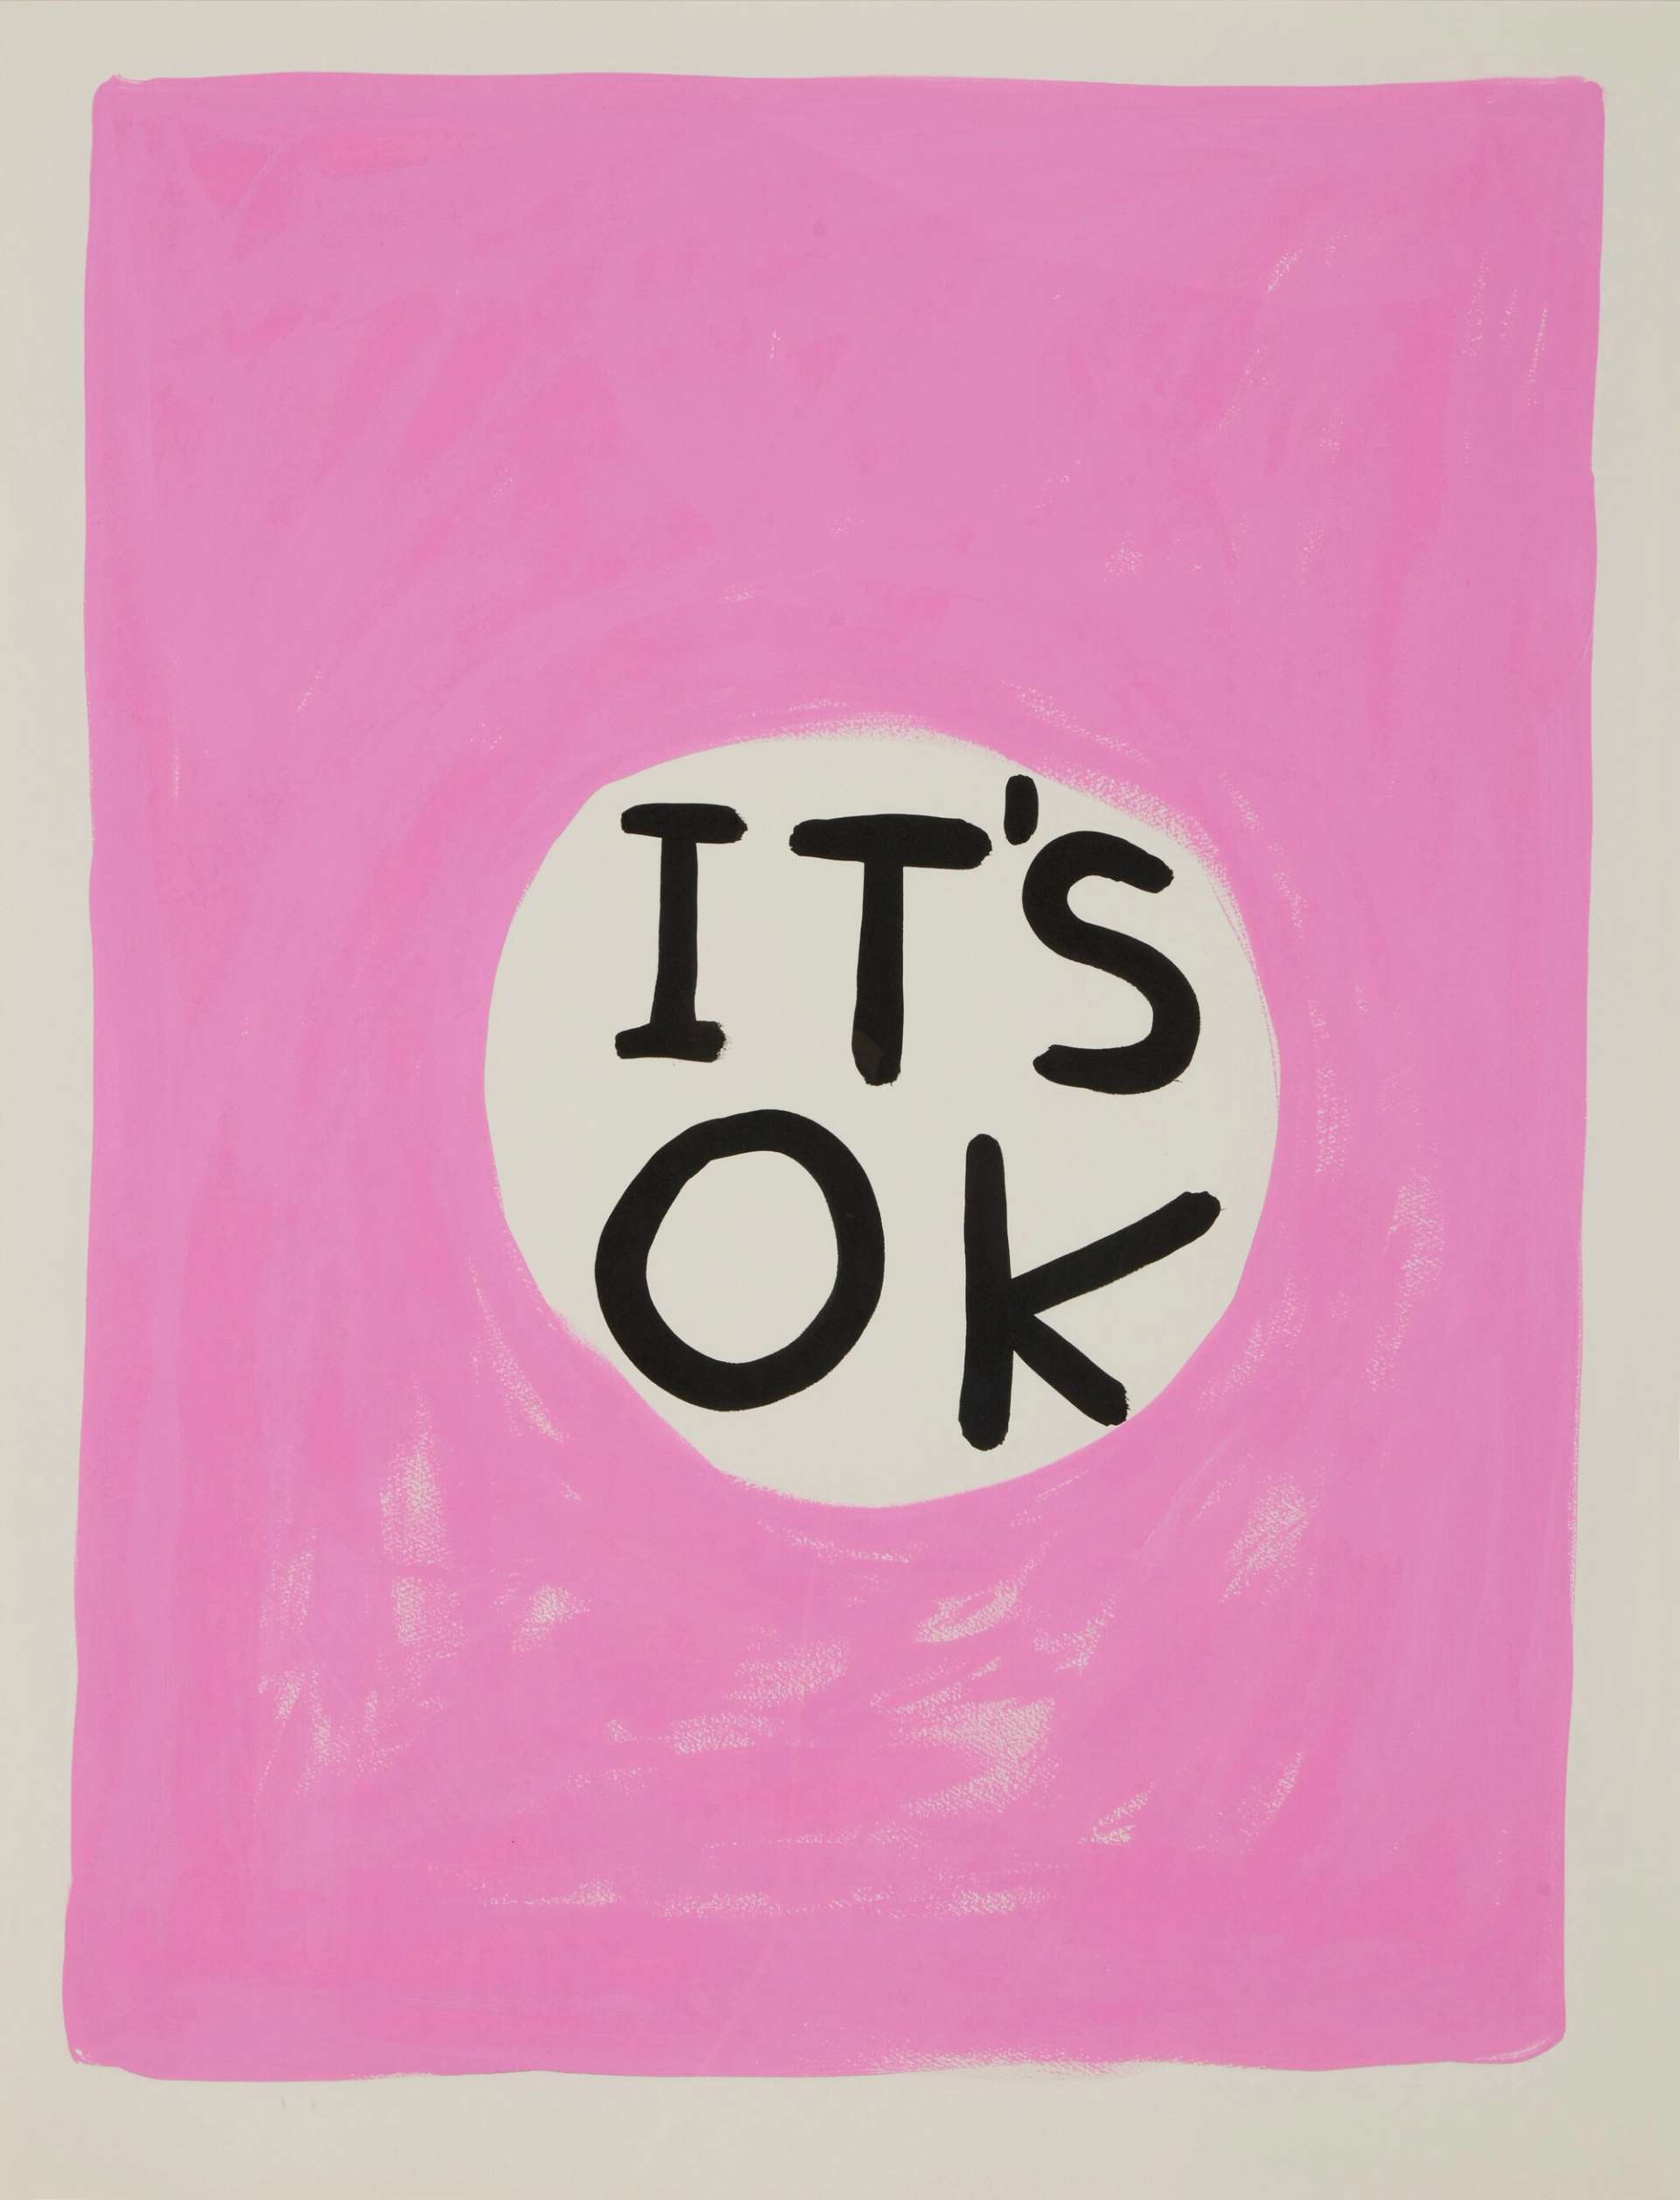 A print of David Shrigley’s Untitled (It’s Ok). A white-bordered pink painting with the phrase “it’s ok” in the middle of the painting, inside of a solid white circle.